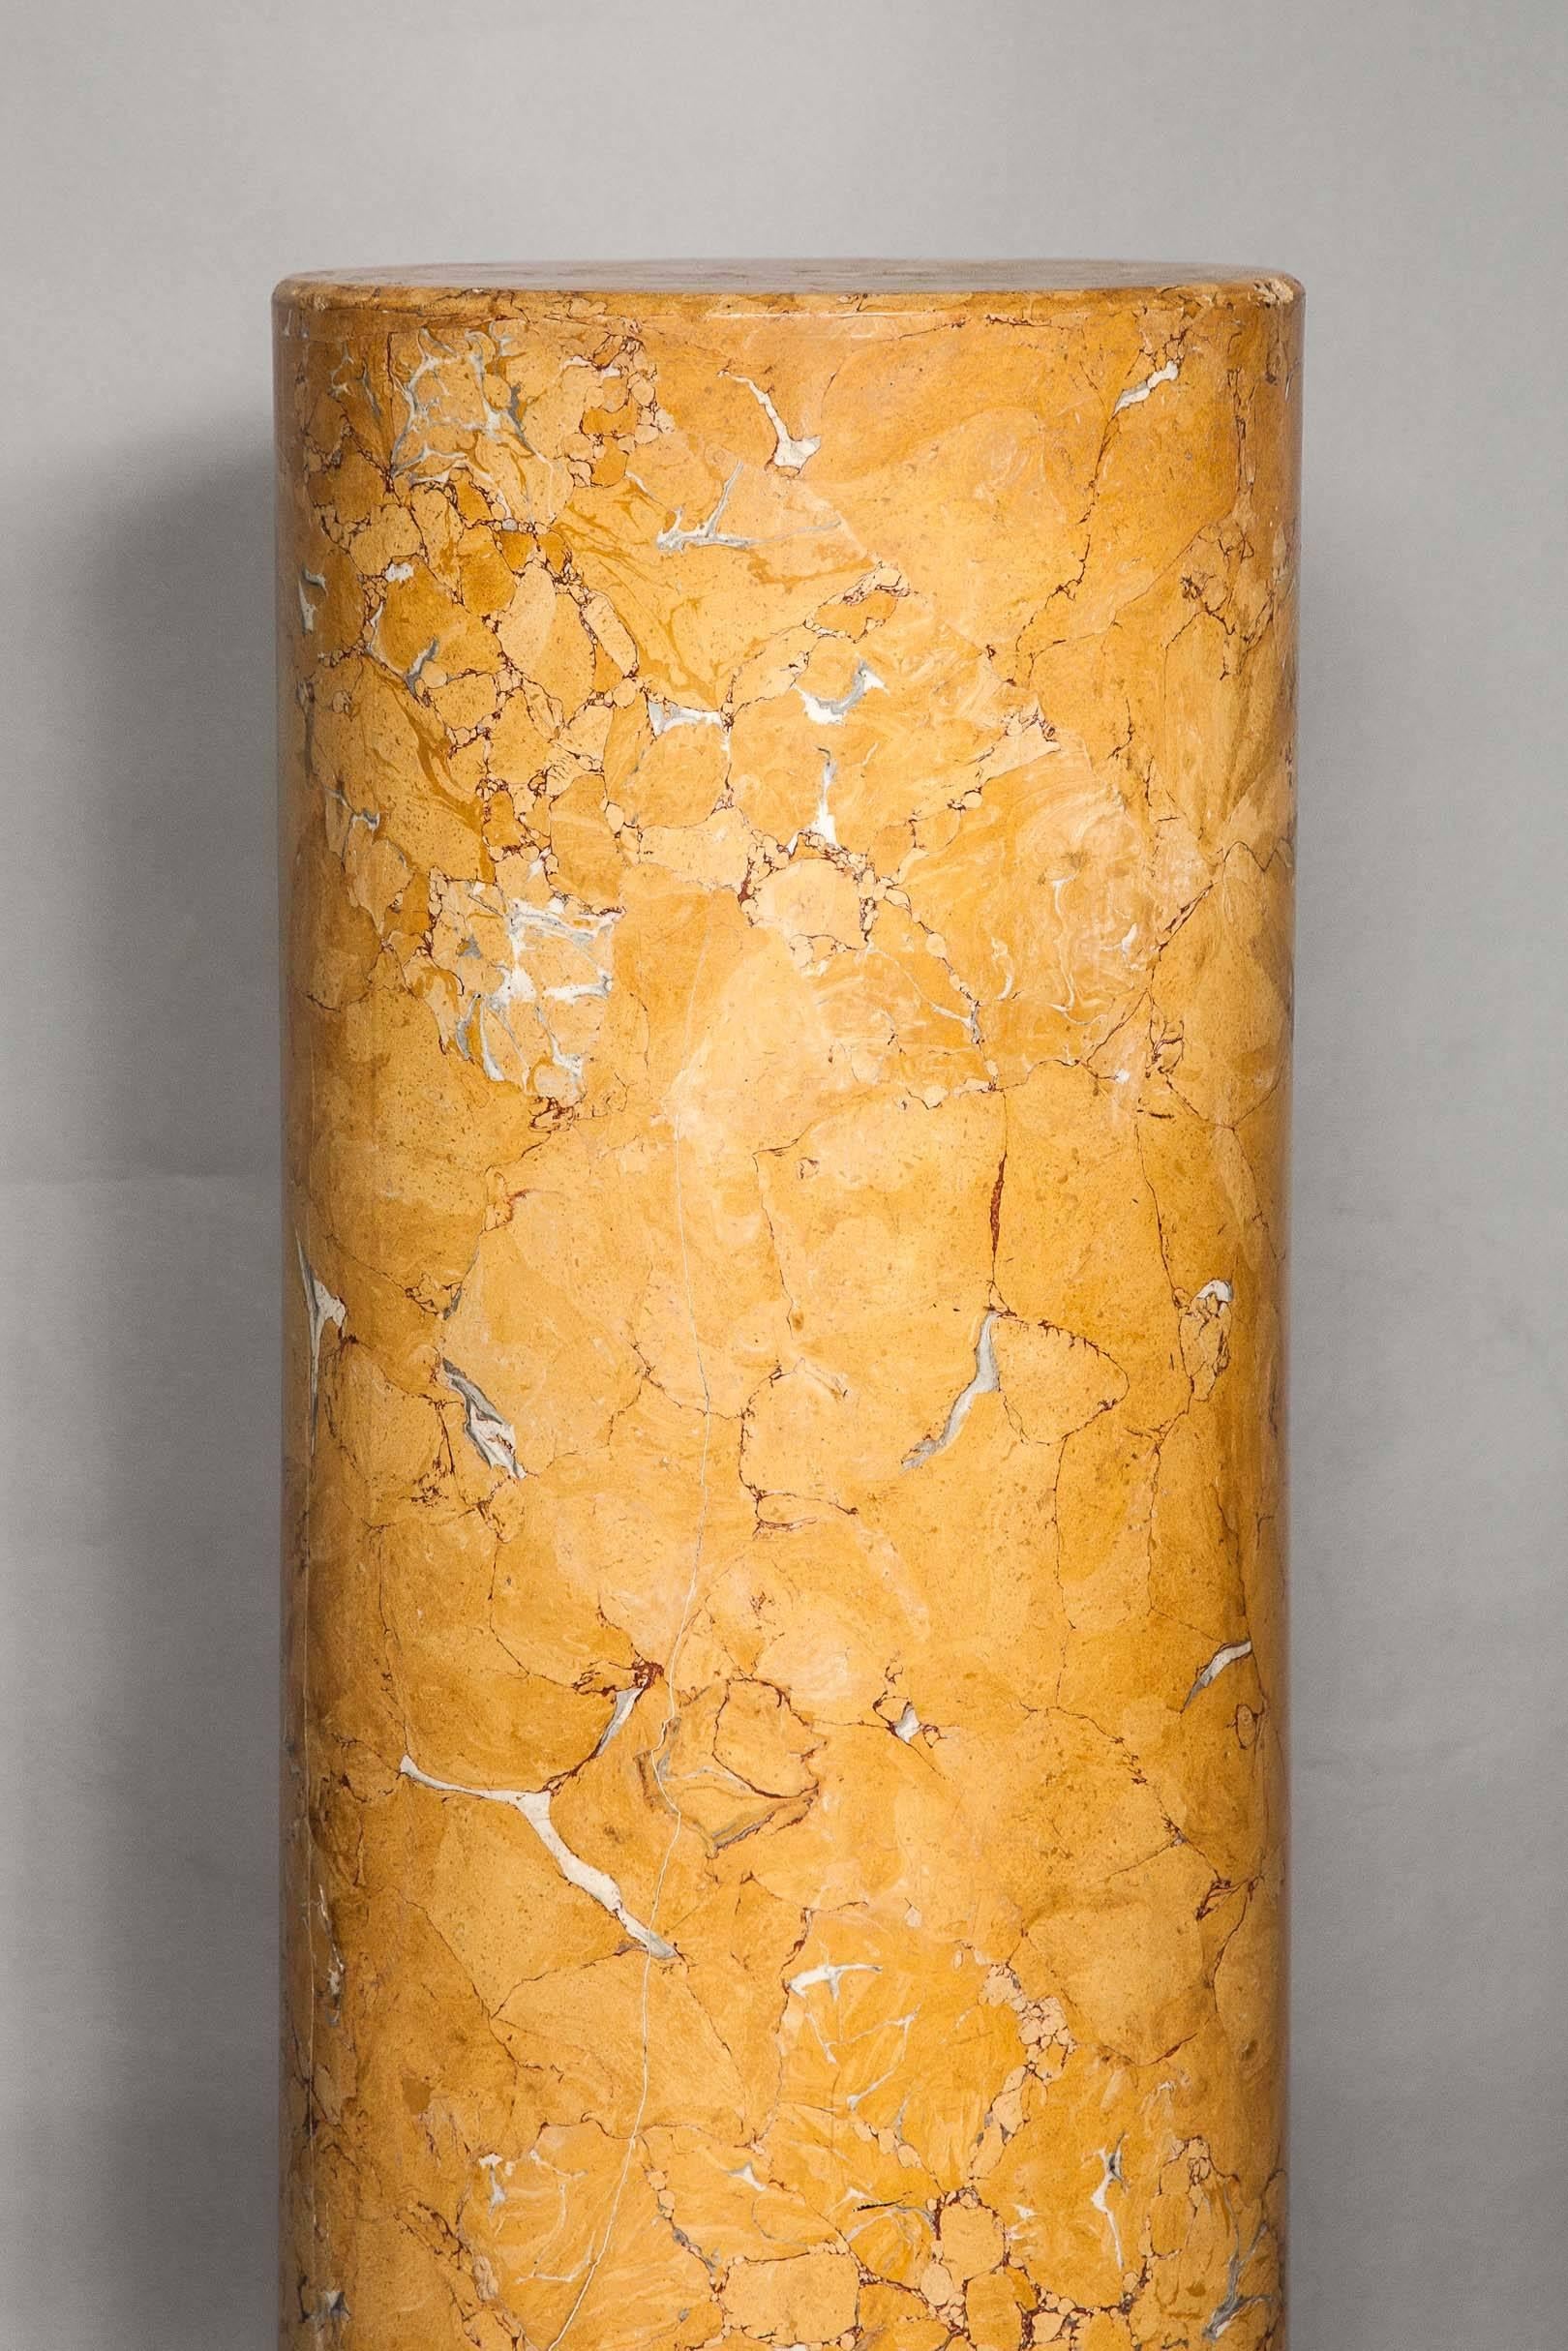 An incredibly realistic high quality scagliola column with a Siena marbled finish on a Carrara like white marbled base dating circa 1770-1800.
In very good condition, a chip at the top has been restored, see picture 9.
Not easy to find proper